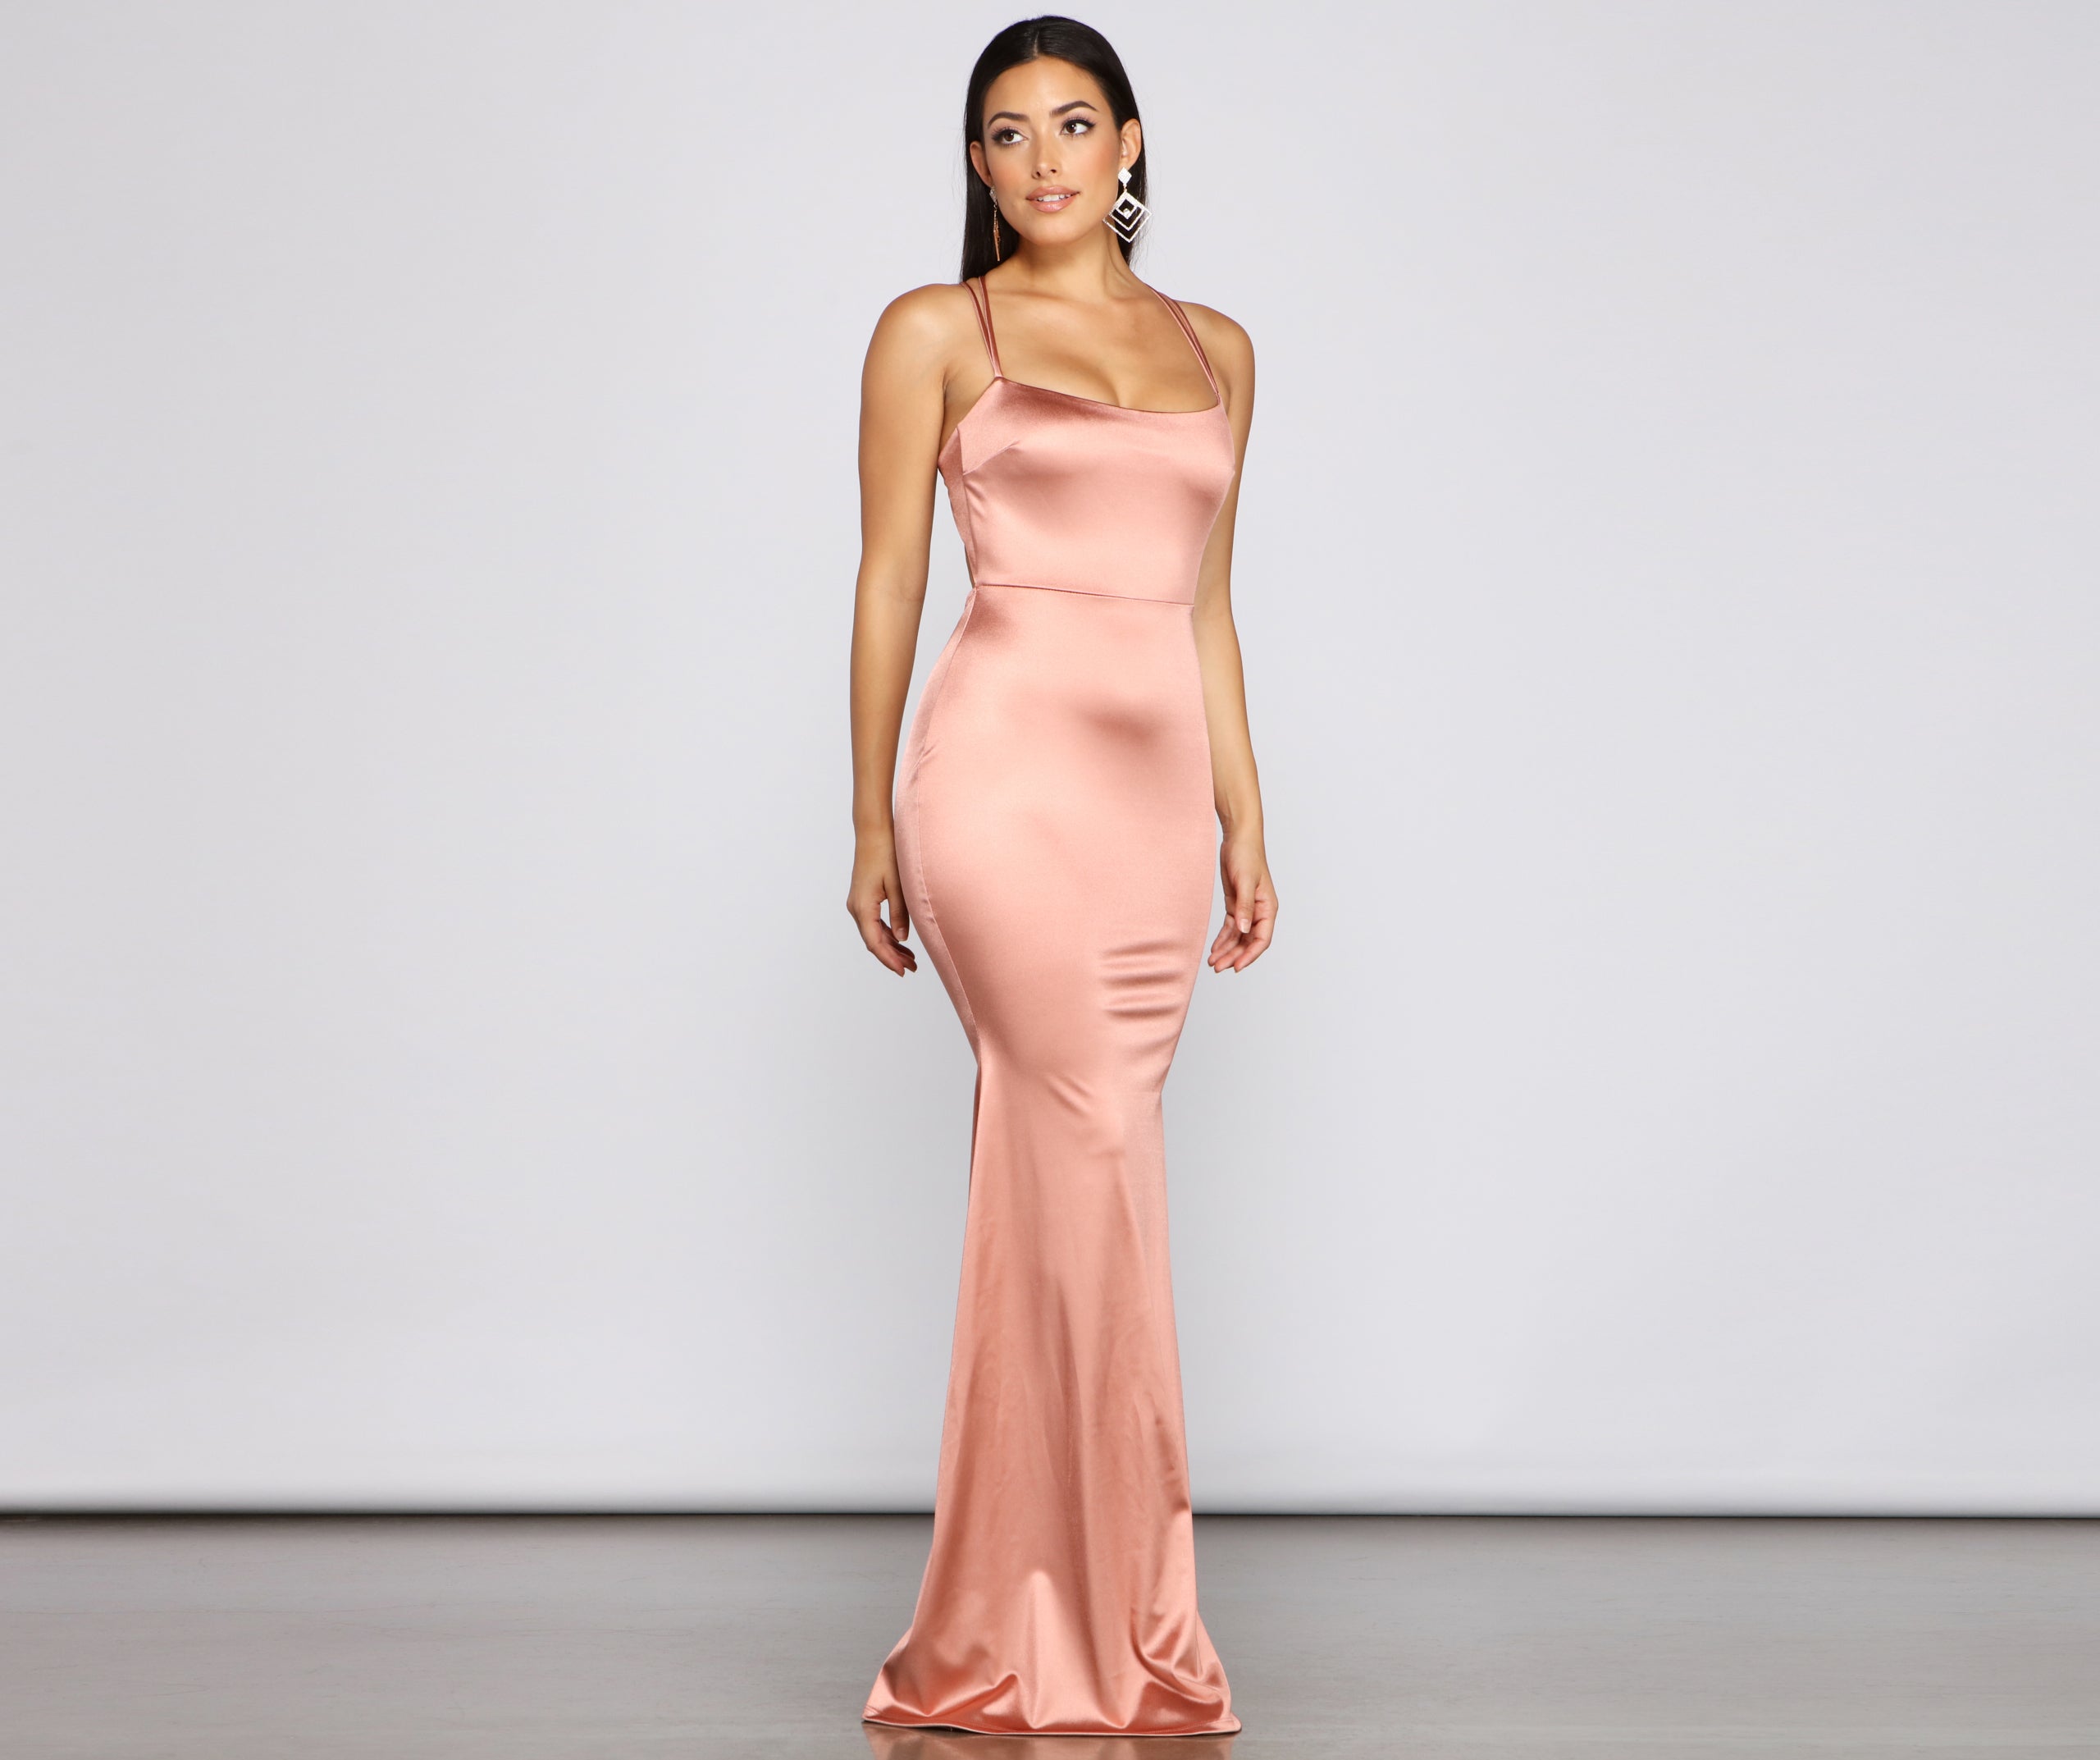 Candace Satin Ruched Mermaid Dress